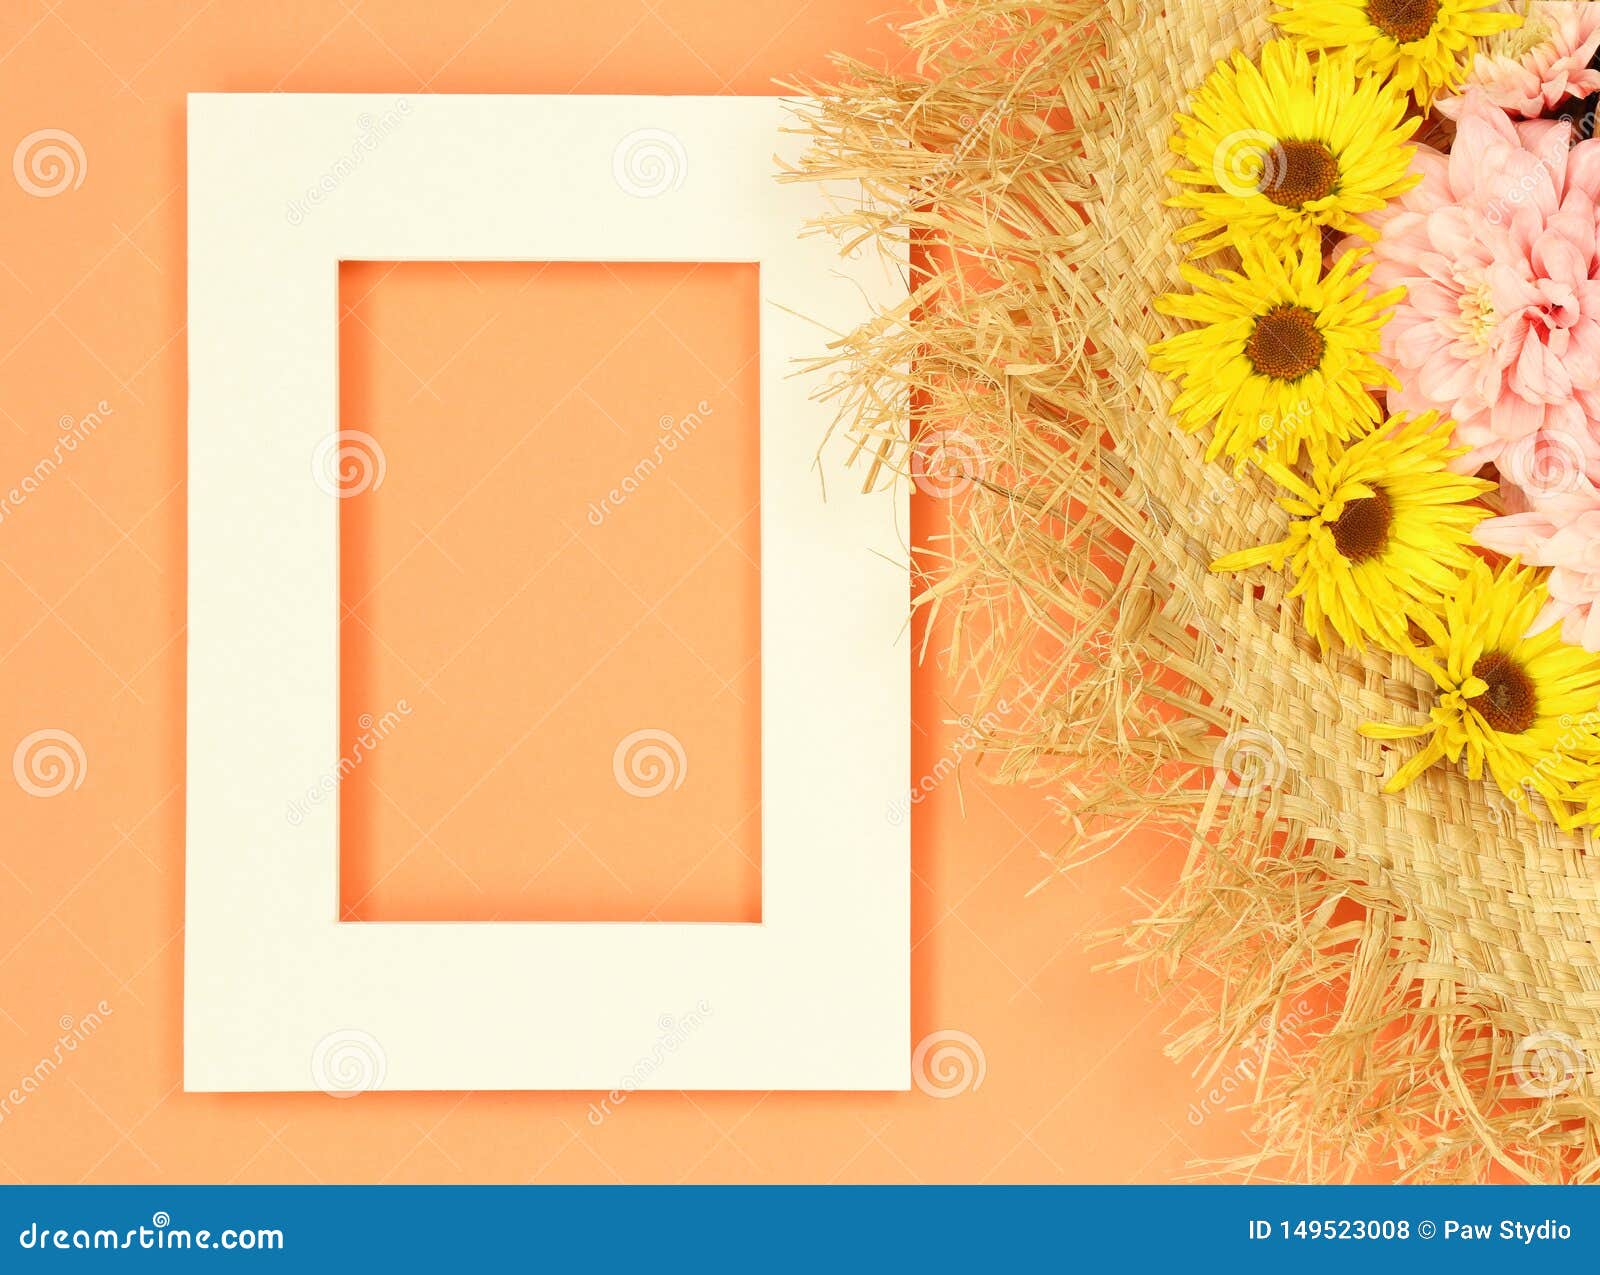 Download Summer Mockup Photo Frame With Straw Hat Stock Photo - Image of mockup, pink: 149523008